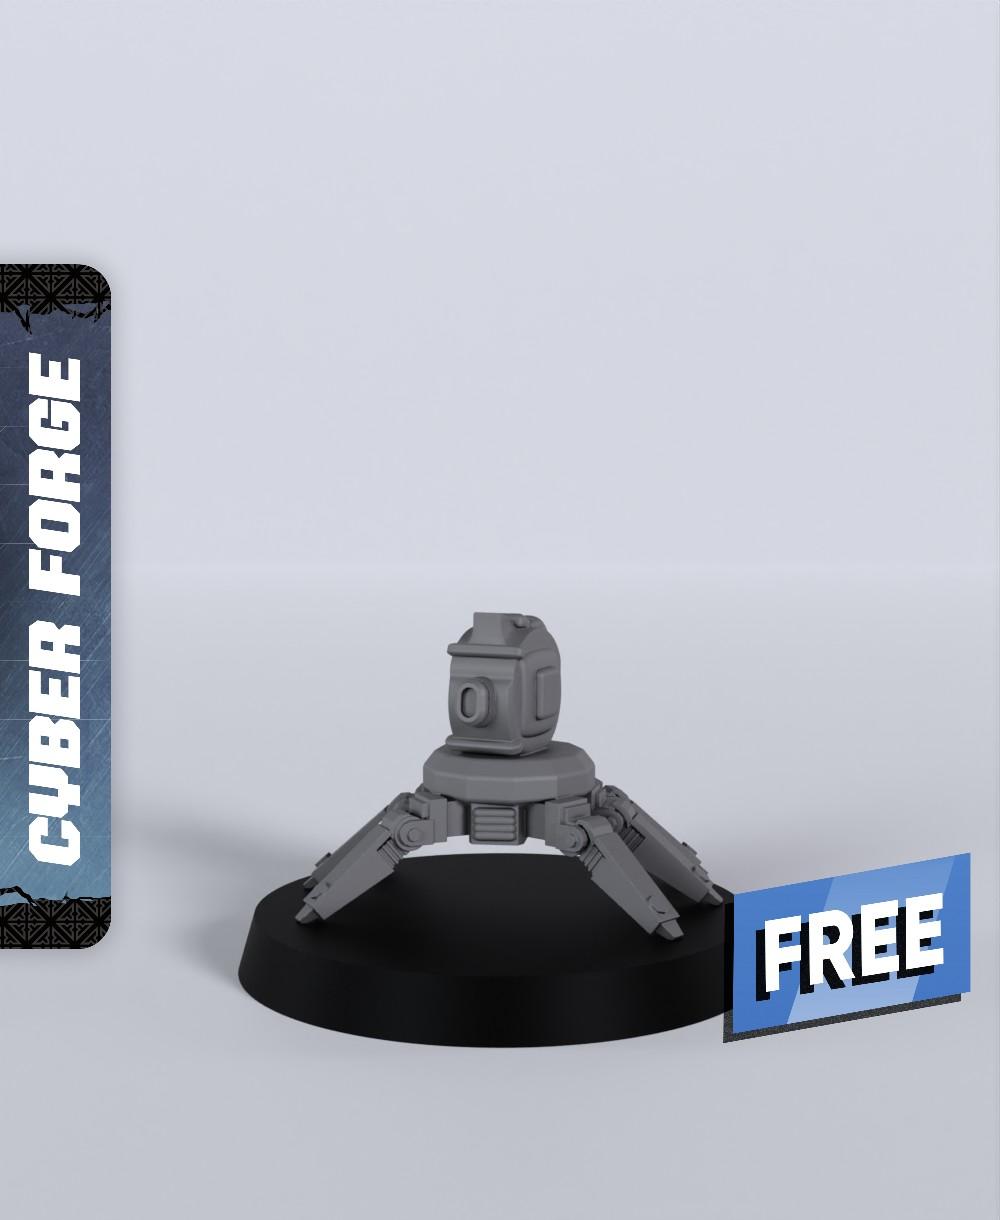 Crabbo - With Free Cyberpunk Dragon Warhammer - 40k Sci-Fi Gift Ideas for RPG and Wargamers 3d model